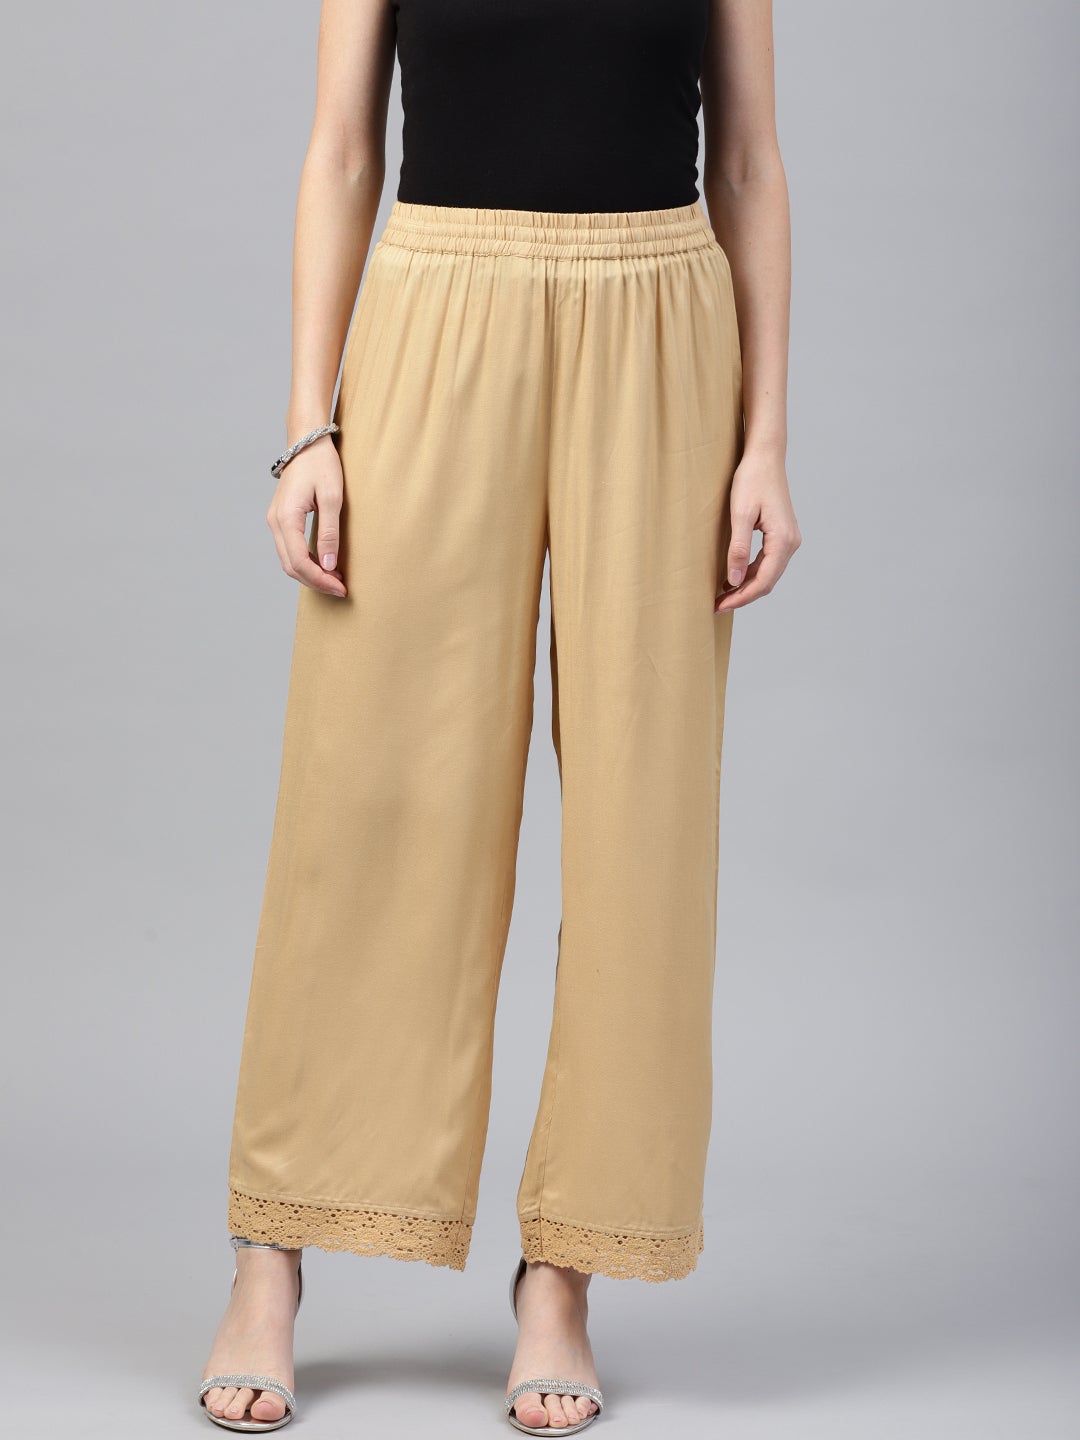 Juniper Gold Solid Rayon Wide Leg Women Palazzo With One Pocket